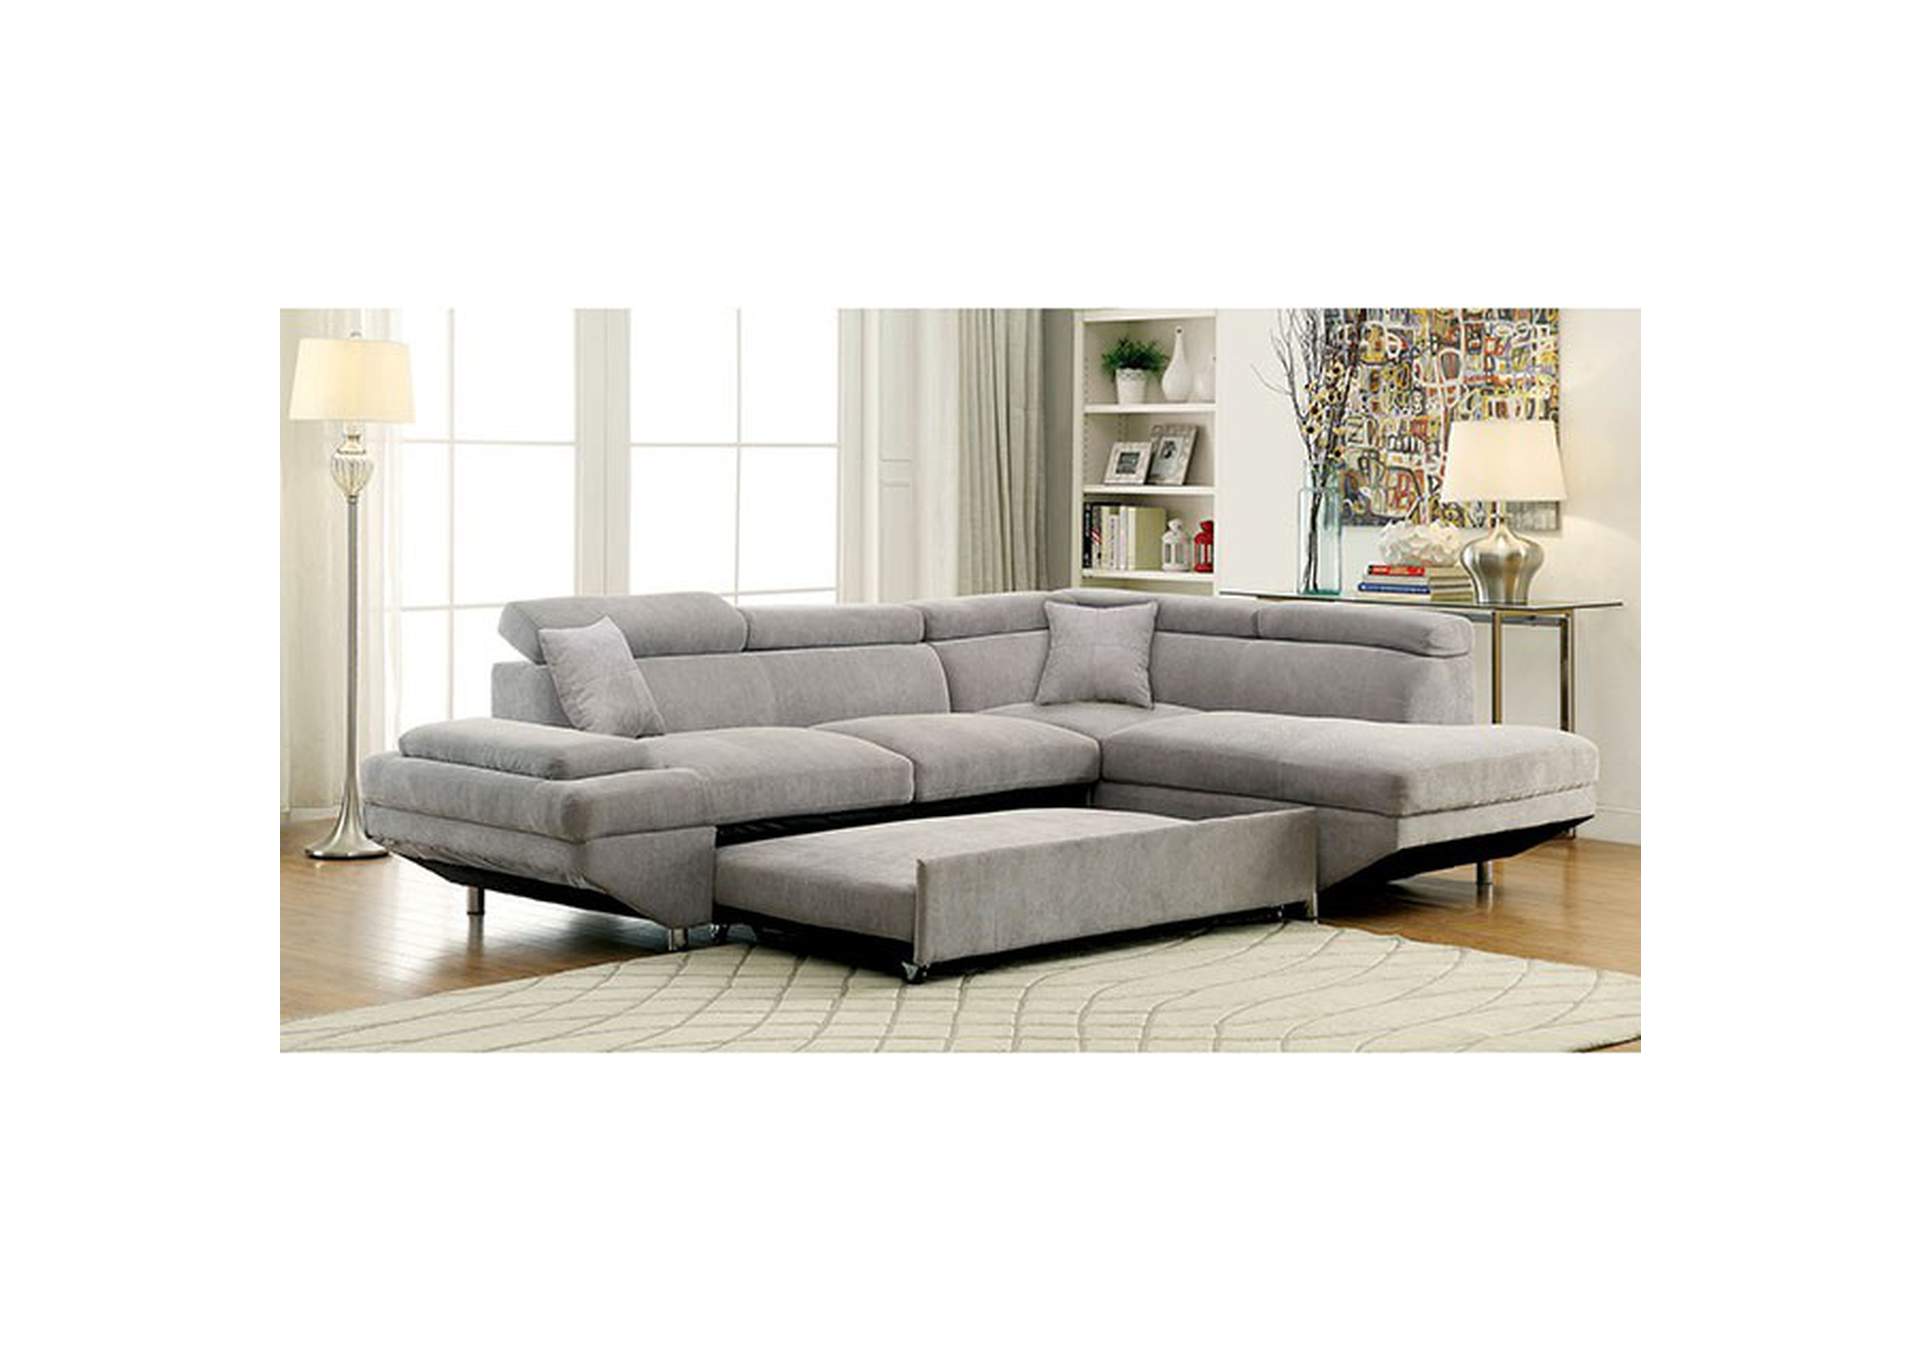 Foreman Sectional,Furniture of America